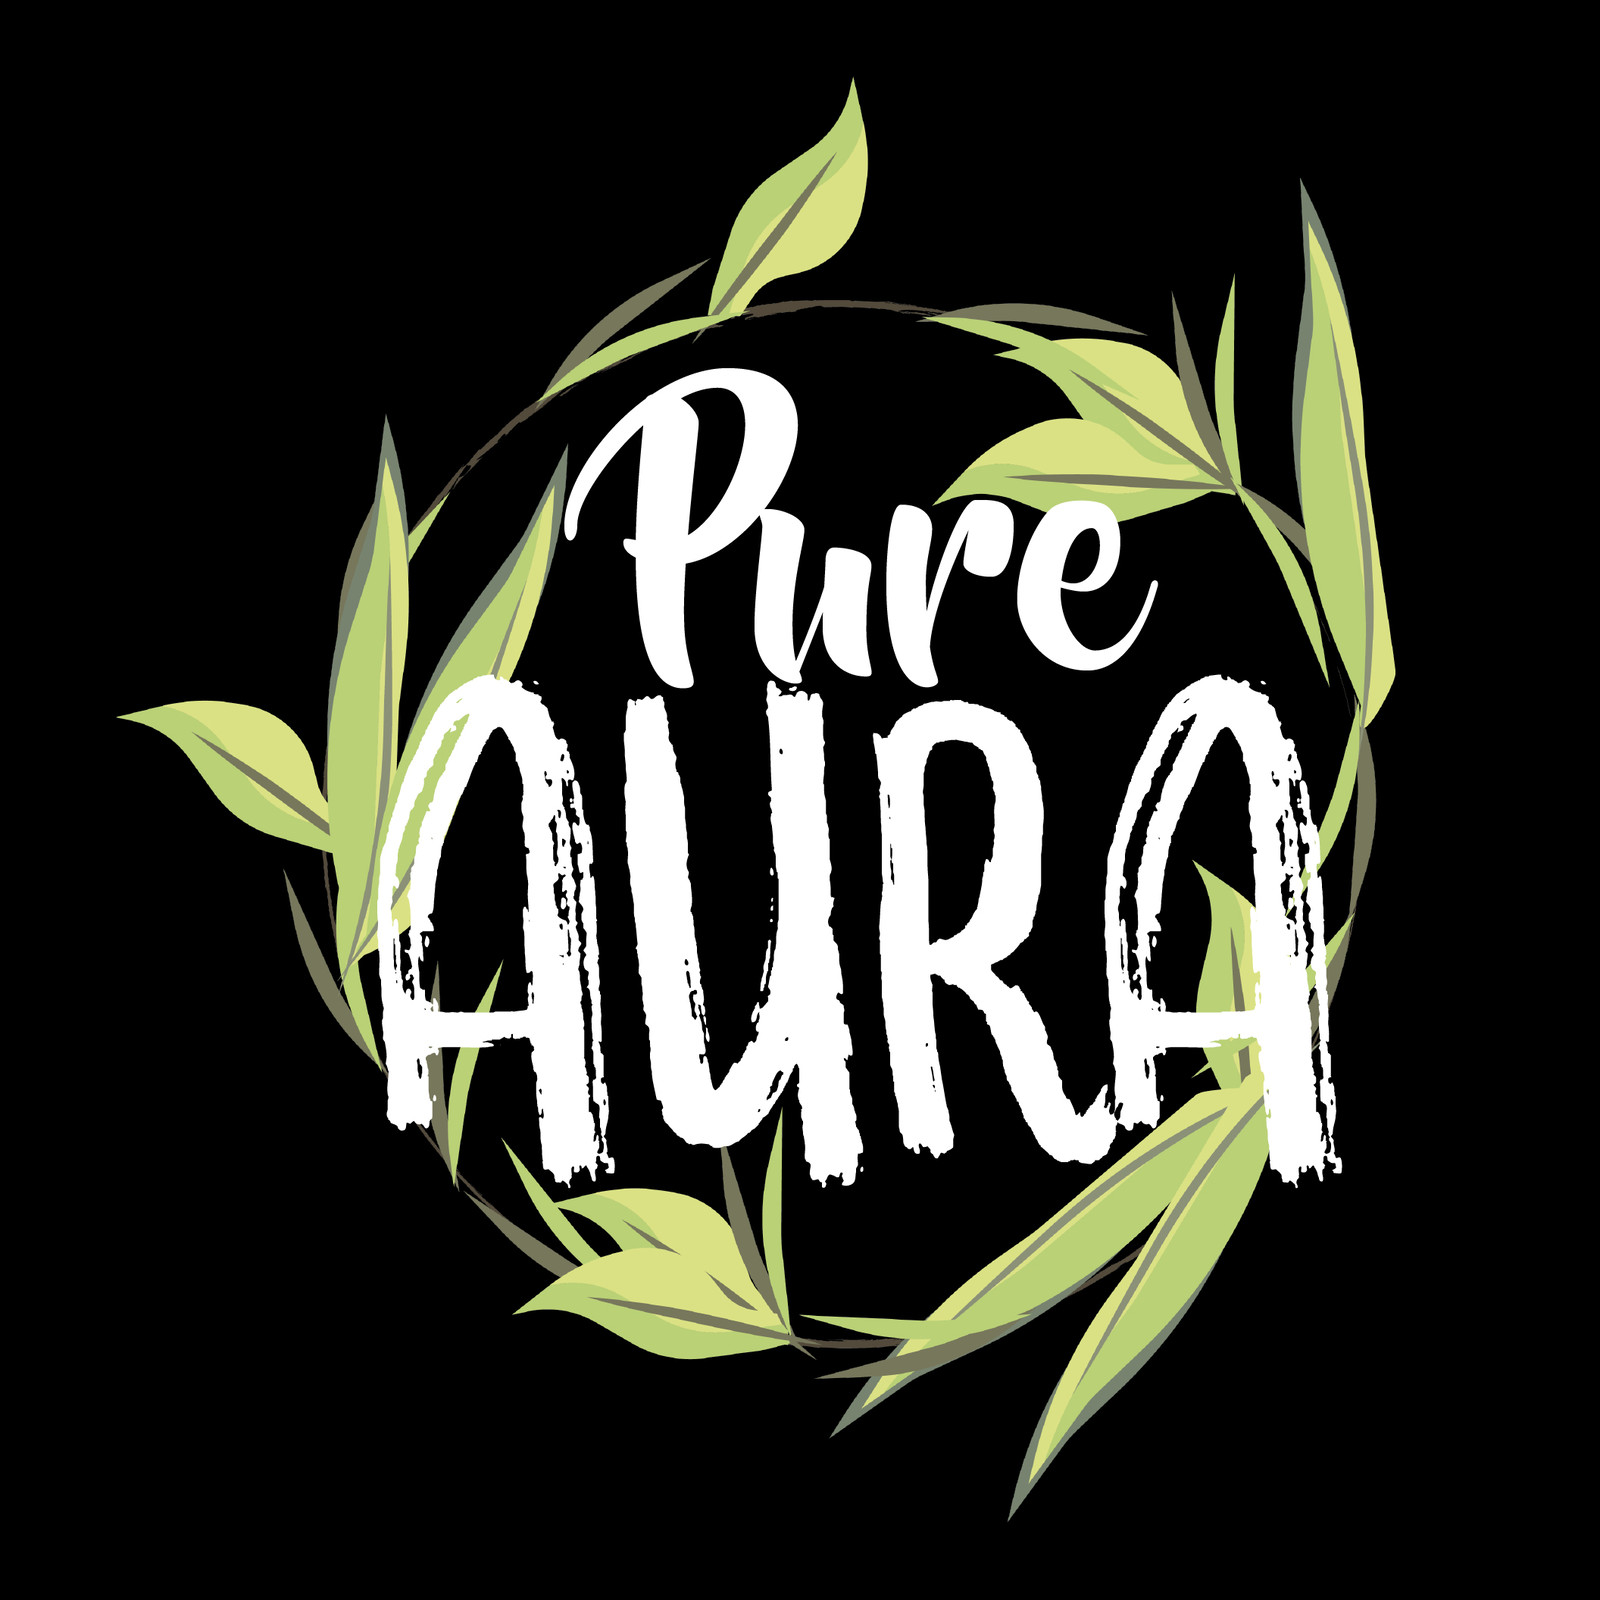 Logo design for Pure Aura, the graphic was designed to have a stylized and organic composition, to represent the organic ingredients and values of the company. The text, was selected to also demonstrate how the company uses juxtaposition to reach a wider 